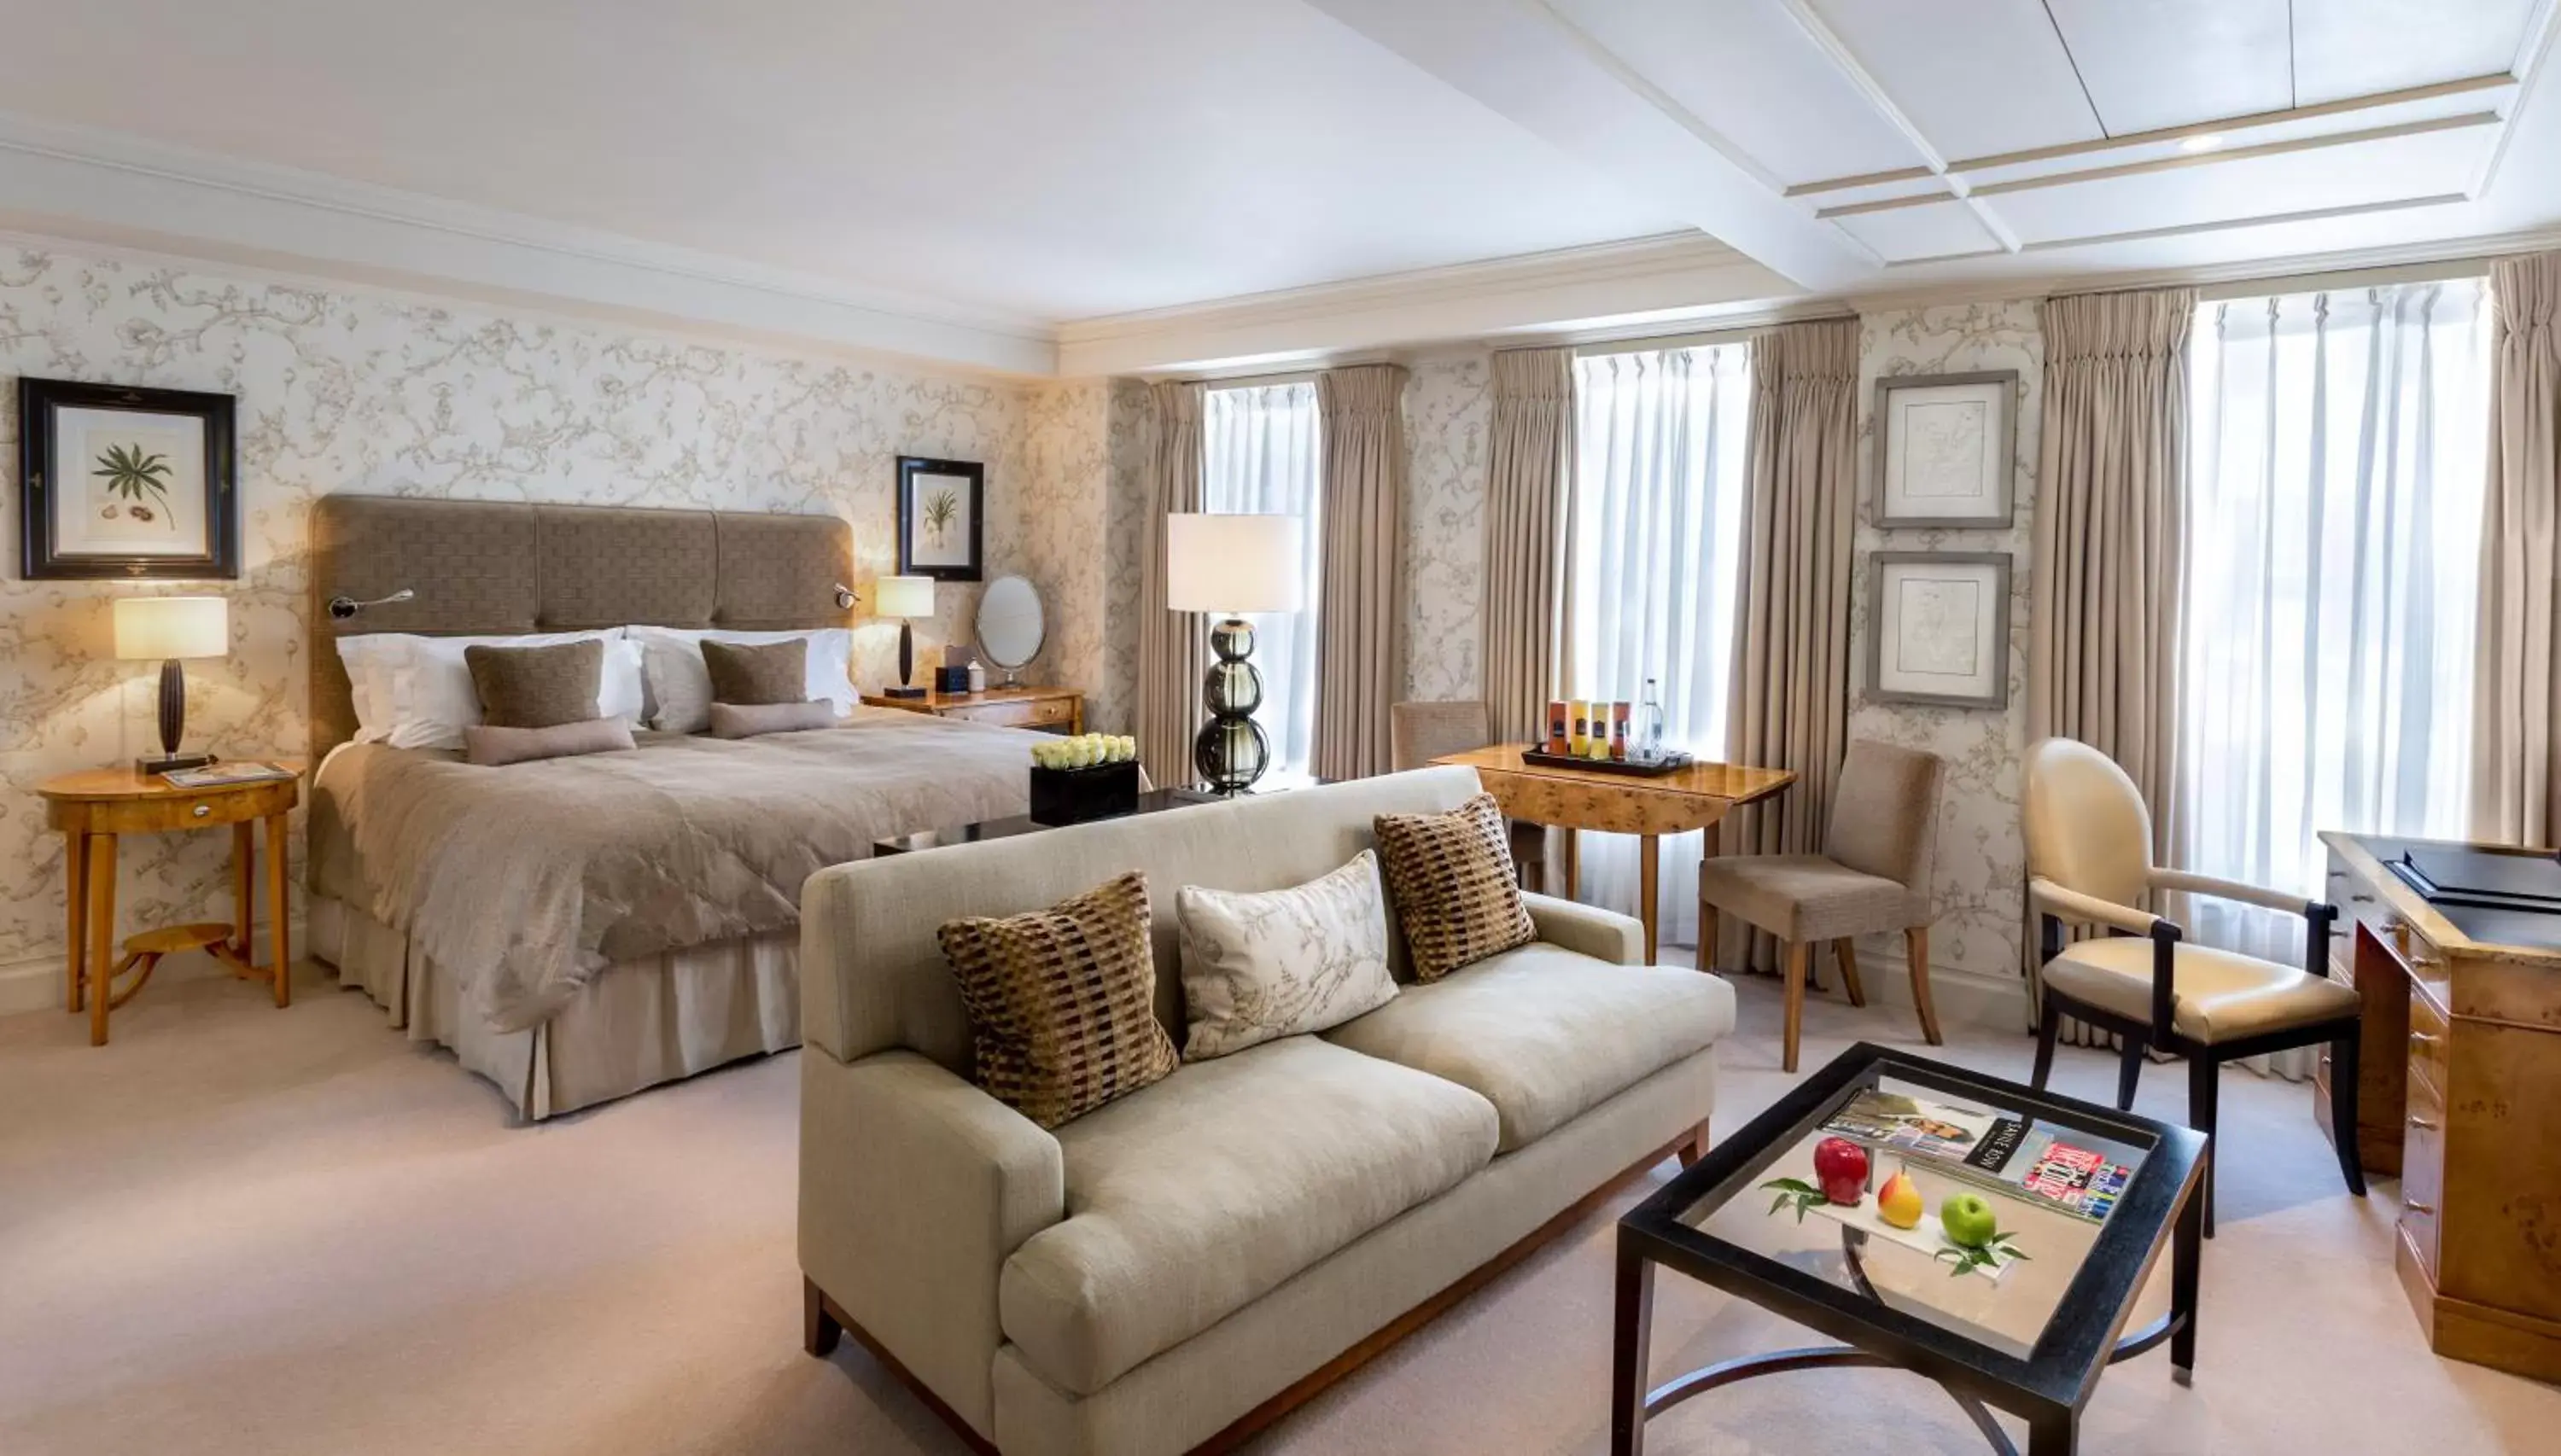 Executive Junior Suite in The Stafford London